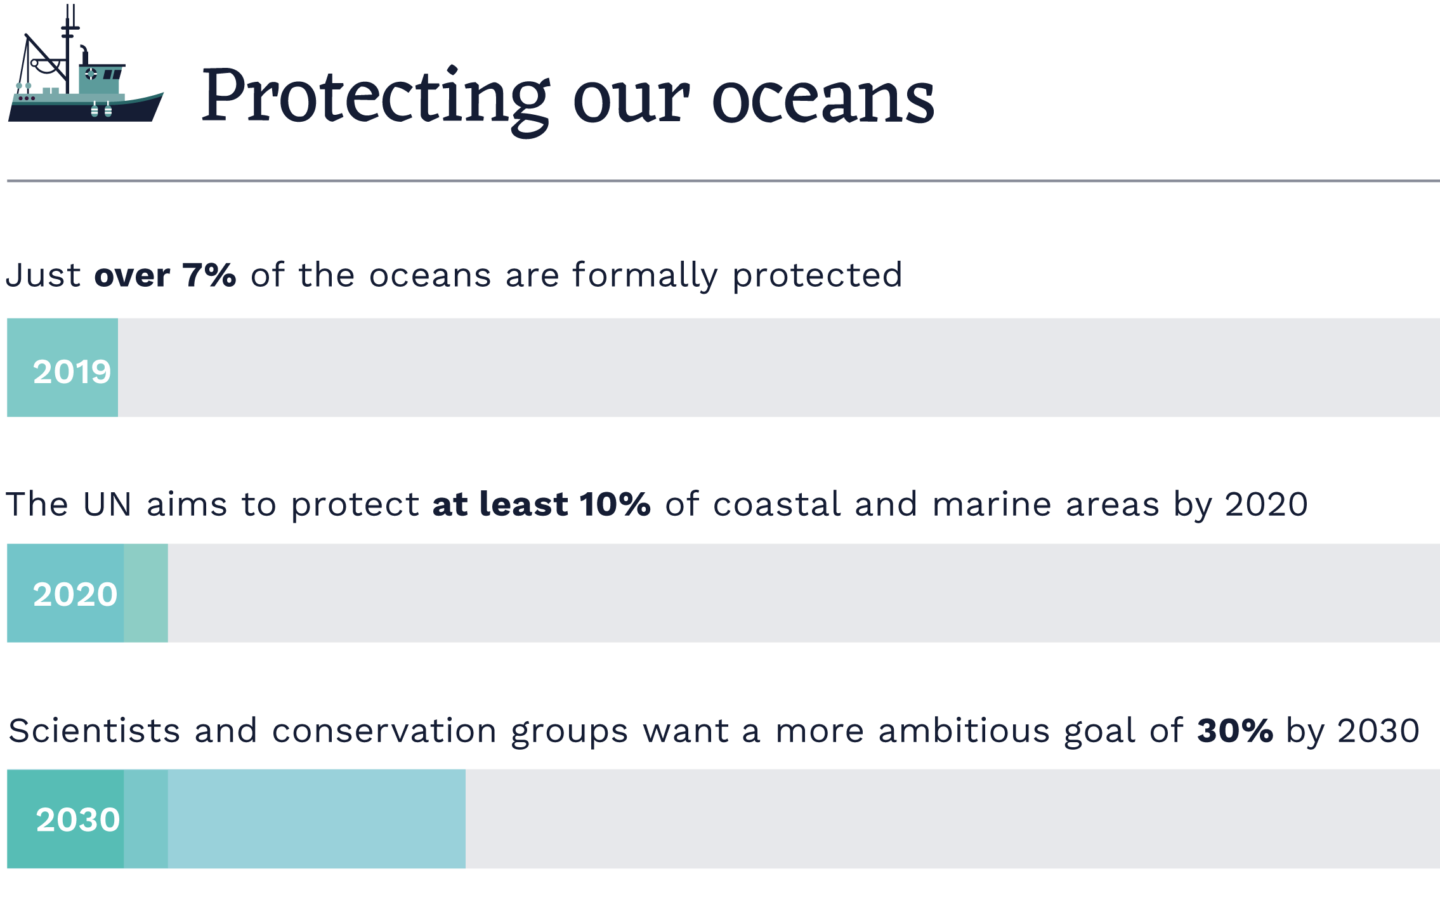 Blue bonds are one way of protecting the world's oceans